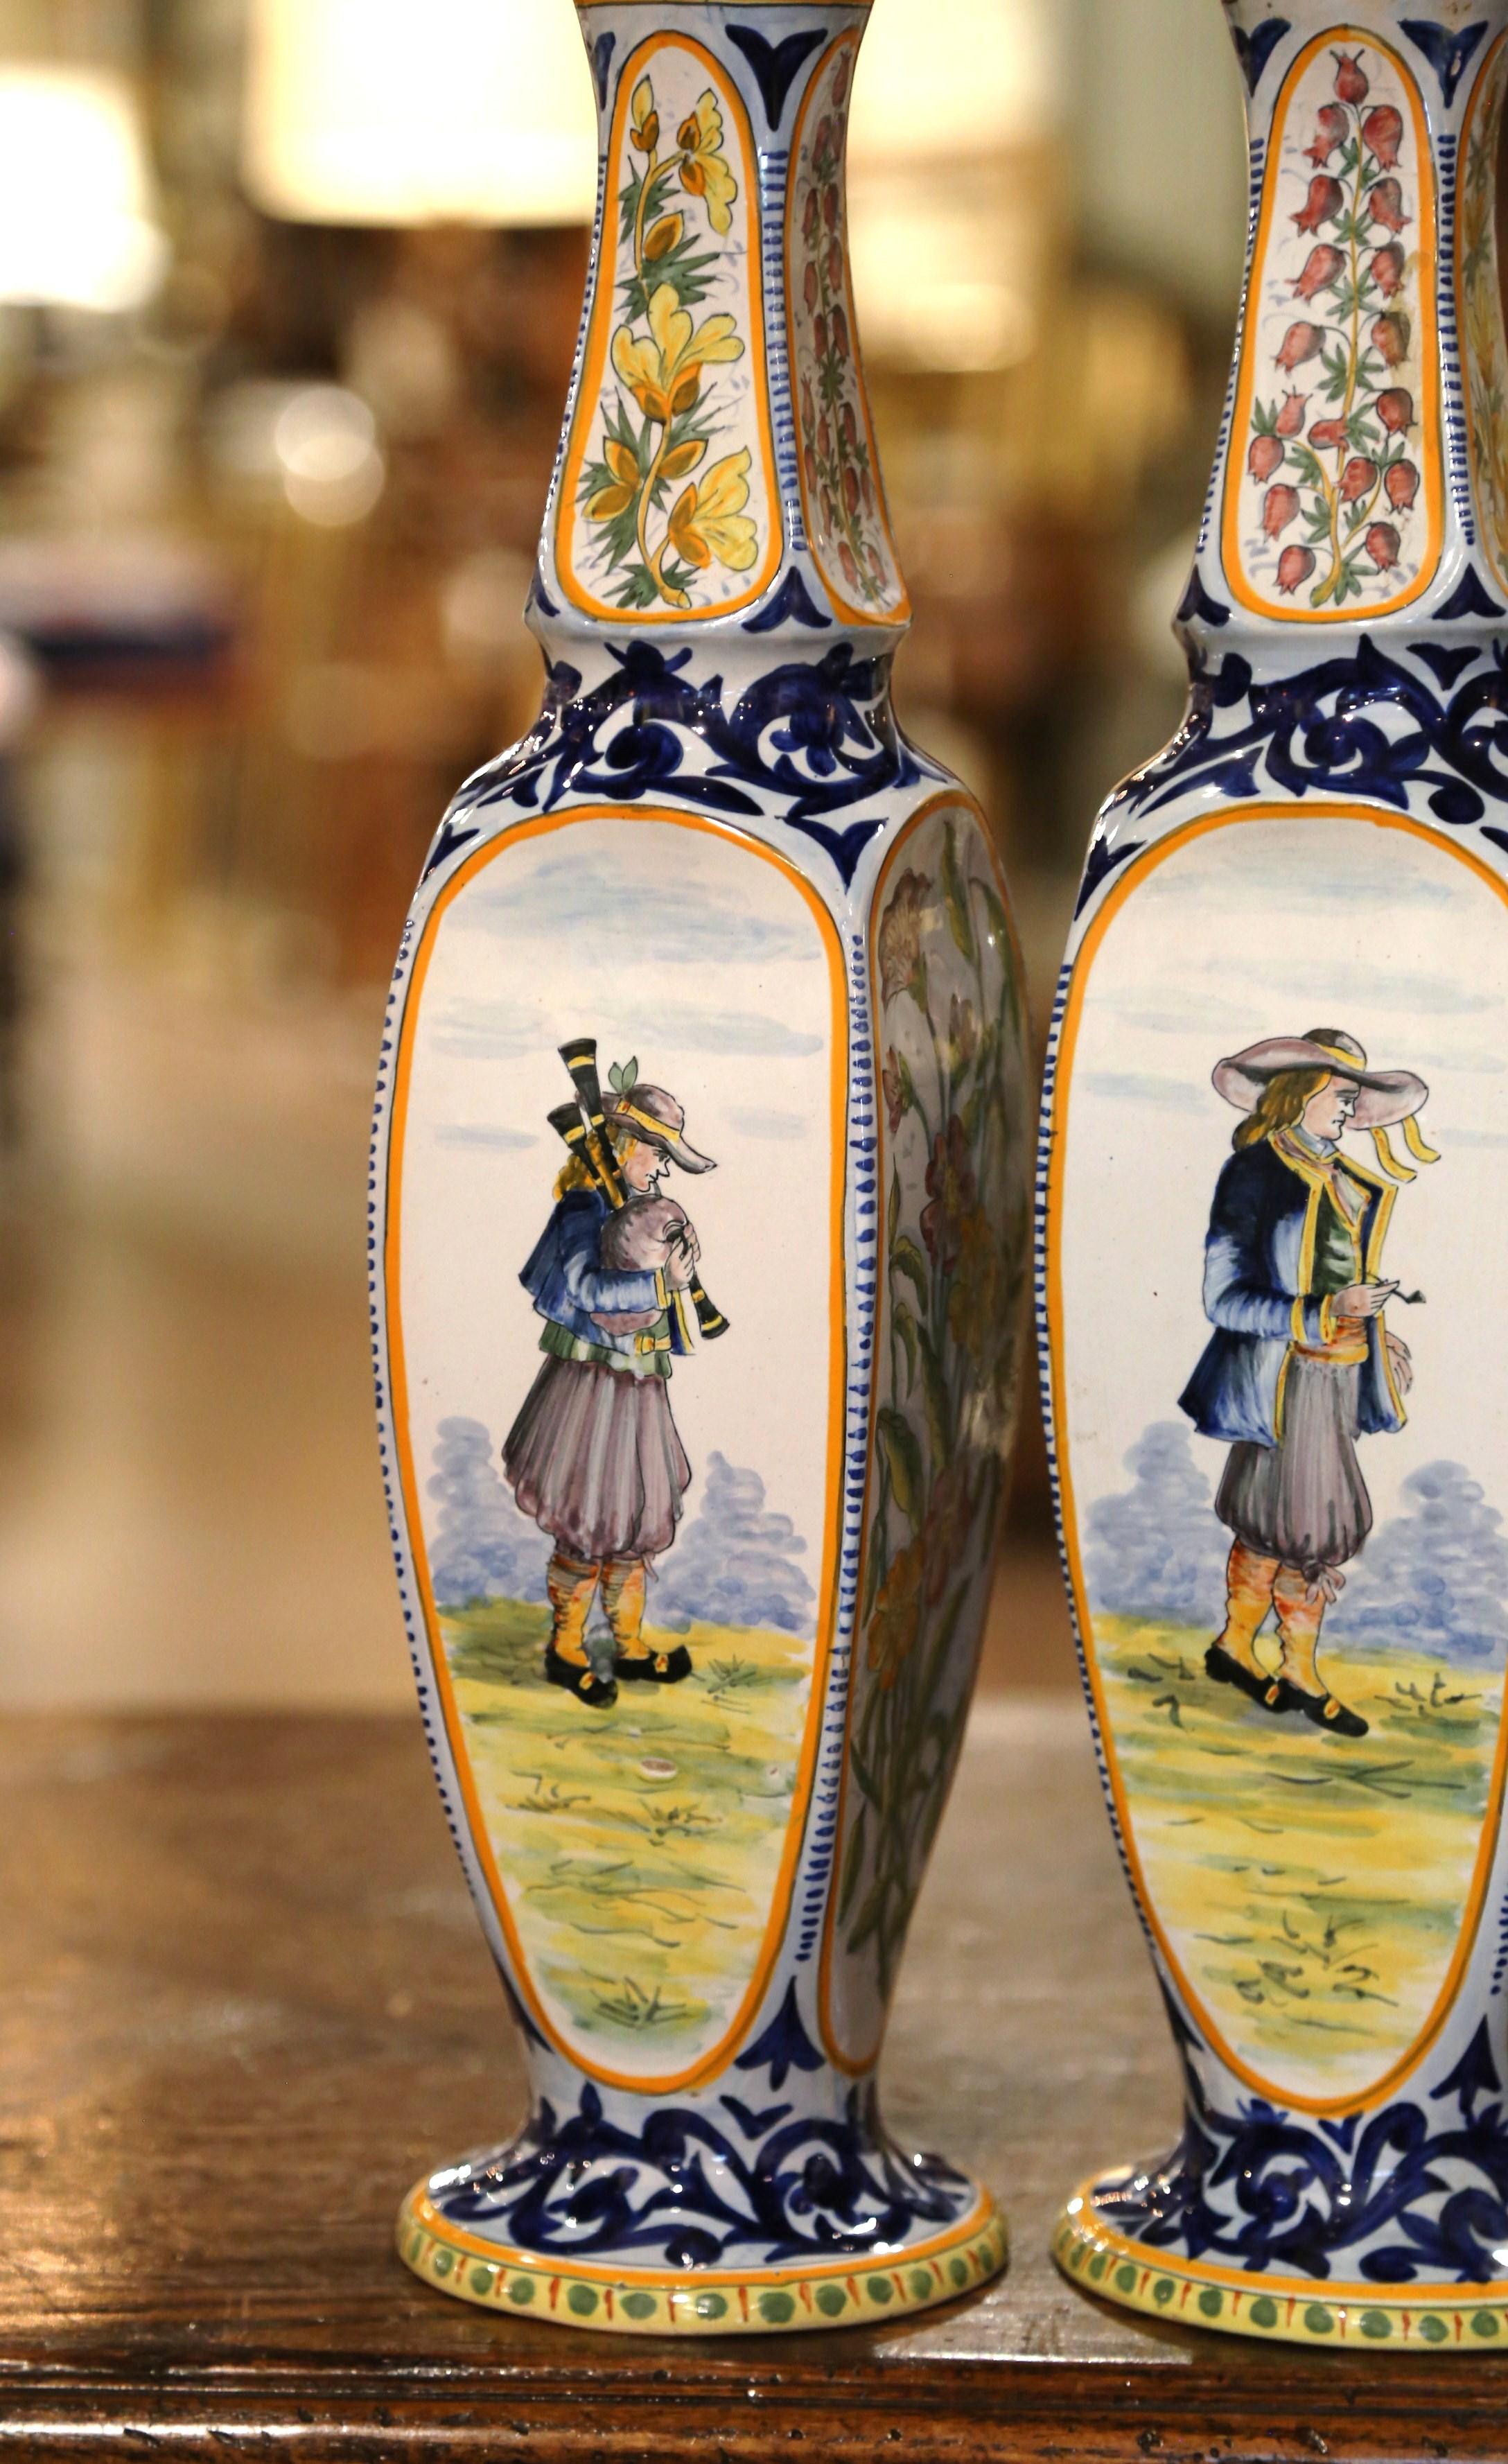 These elegant antique vases were crafted in Britanny France, circa 1920. The tall ceramic vases stand on a circular base over four flat sides and ending with a long neck. Each vessel features hand painted Breton people in traditional clothing,